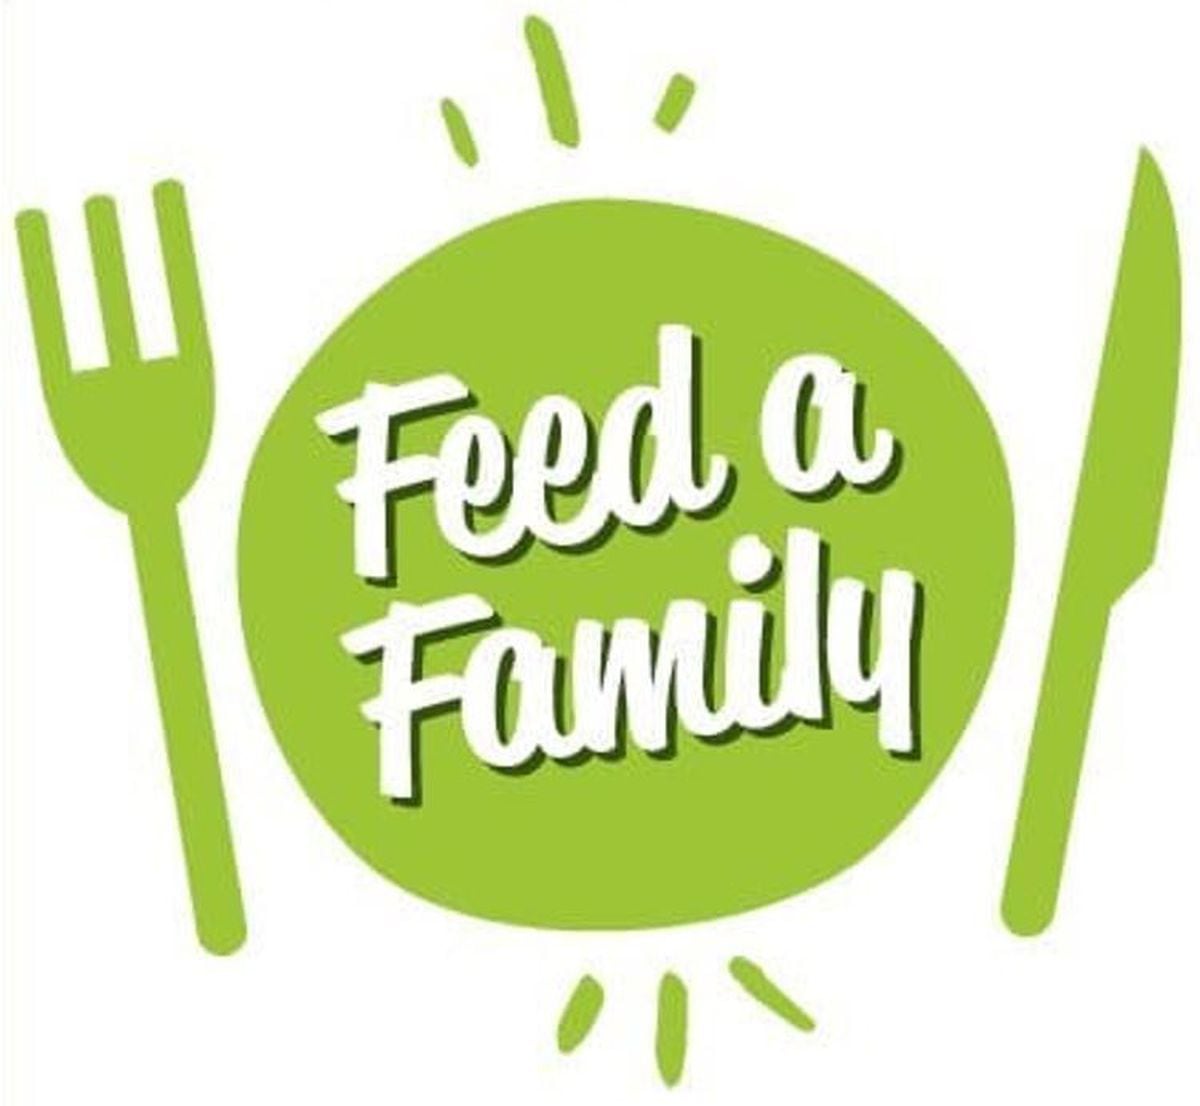 How you can help the E&S's feed a Family campaign